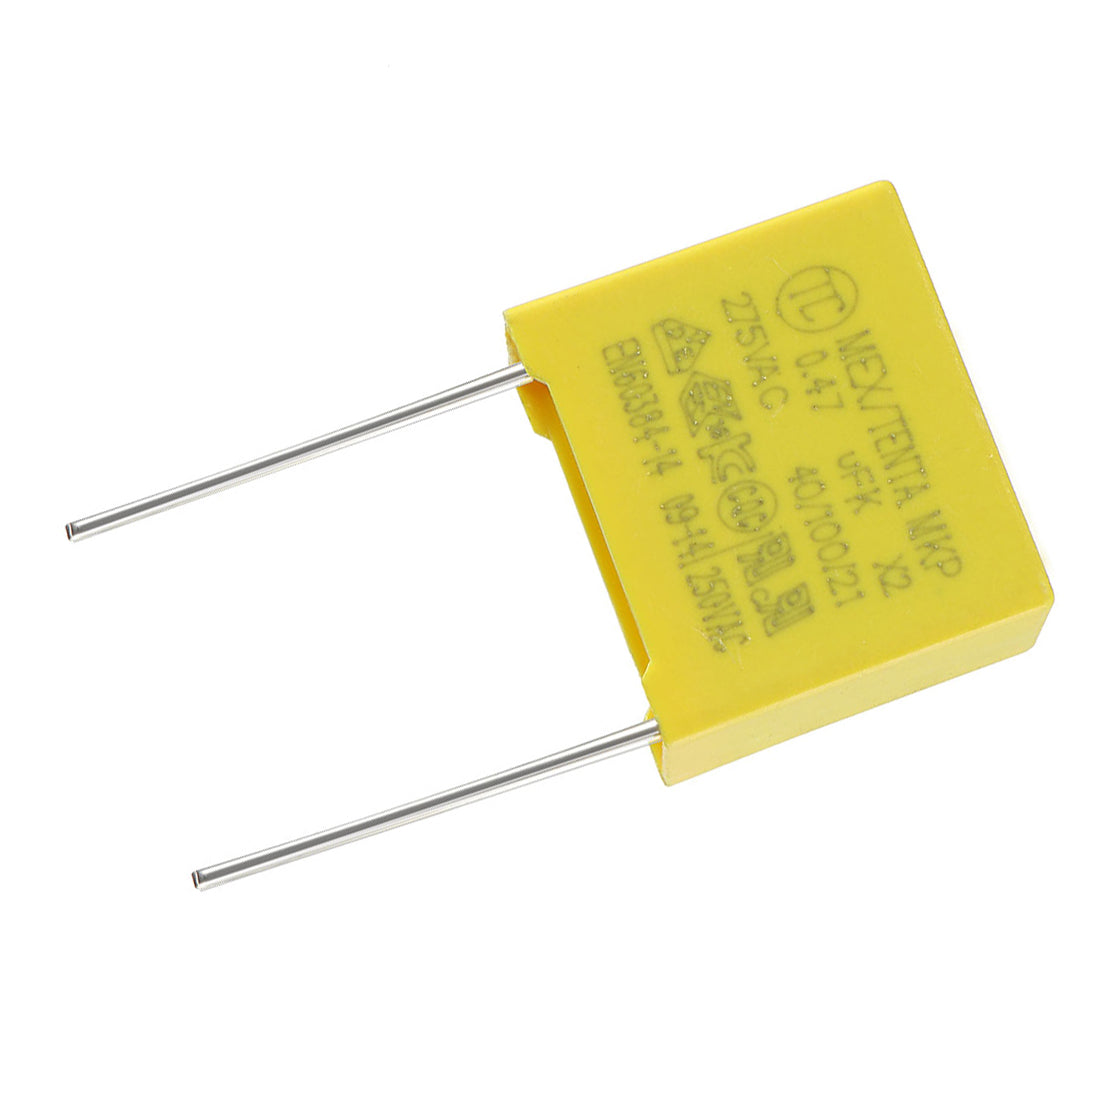 uxcell Uxcell Safety Capacitors Polypropylene Film 0.47uF 275VAC X2 MKP 5 Pcs